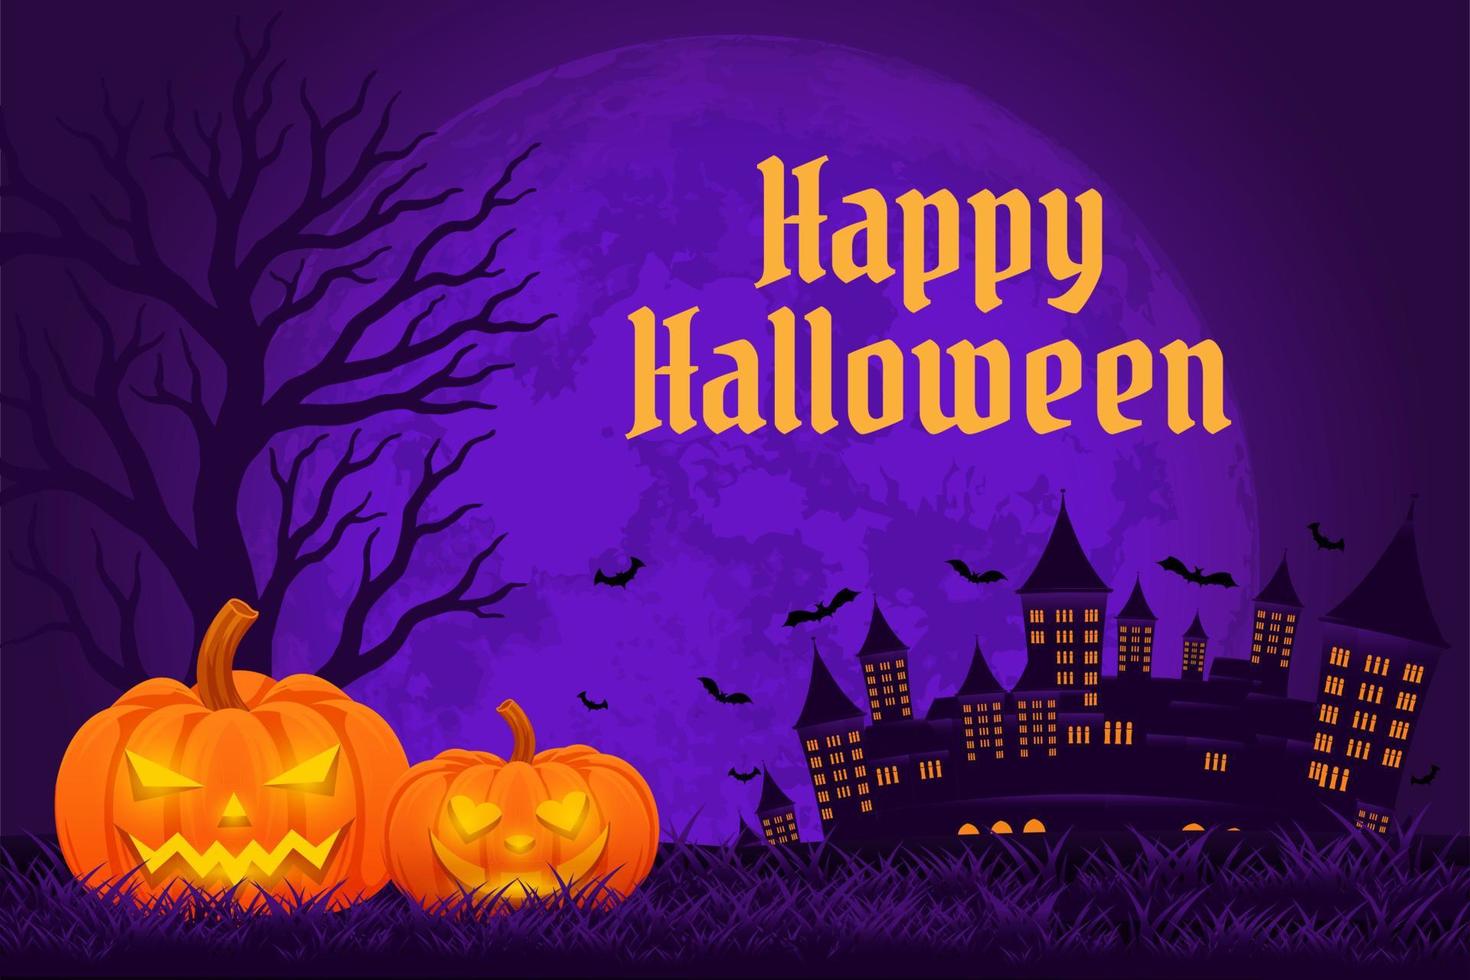 Halloween background template with castle, tree, pumpkin and moon vector, happy halloween backdrop for sale promotion, banner, poster, social media, feed, invitation, event, wallpaper in purple color vector